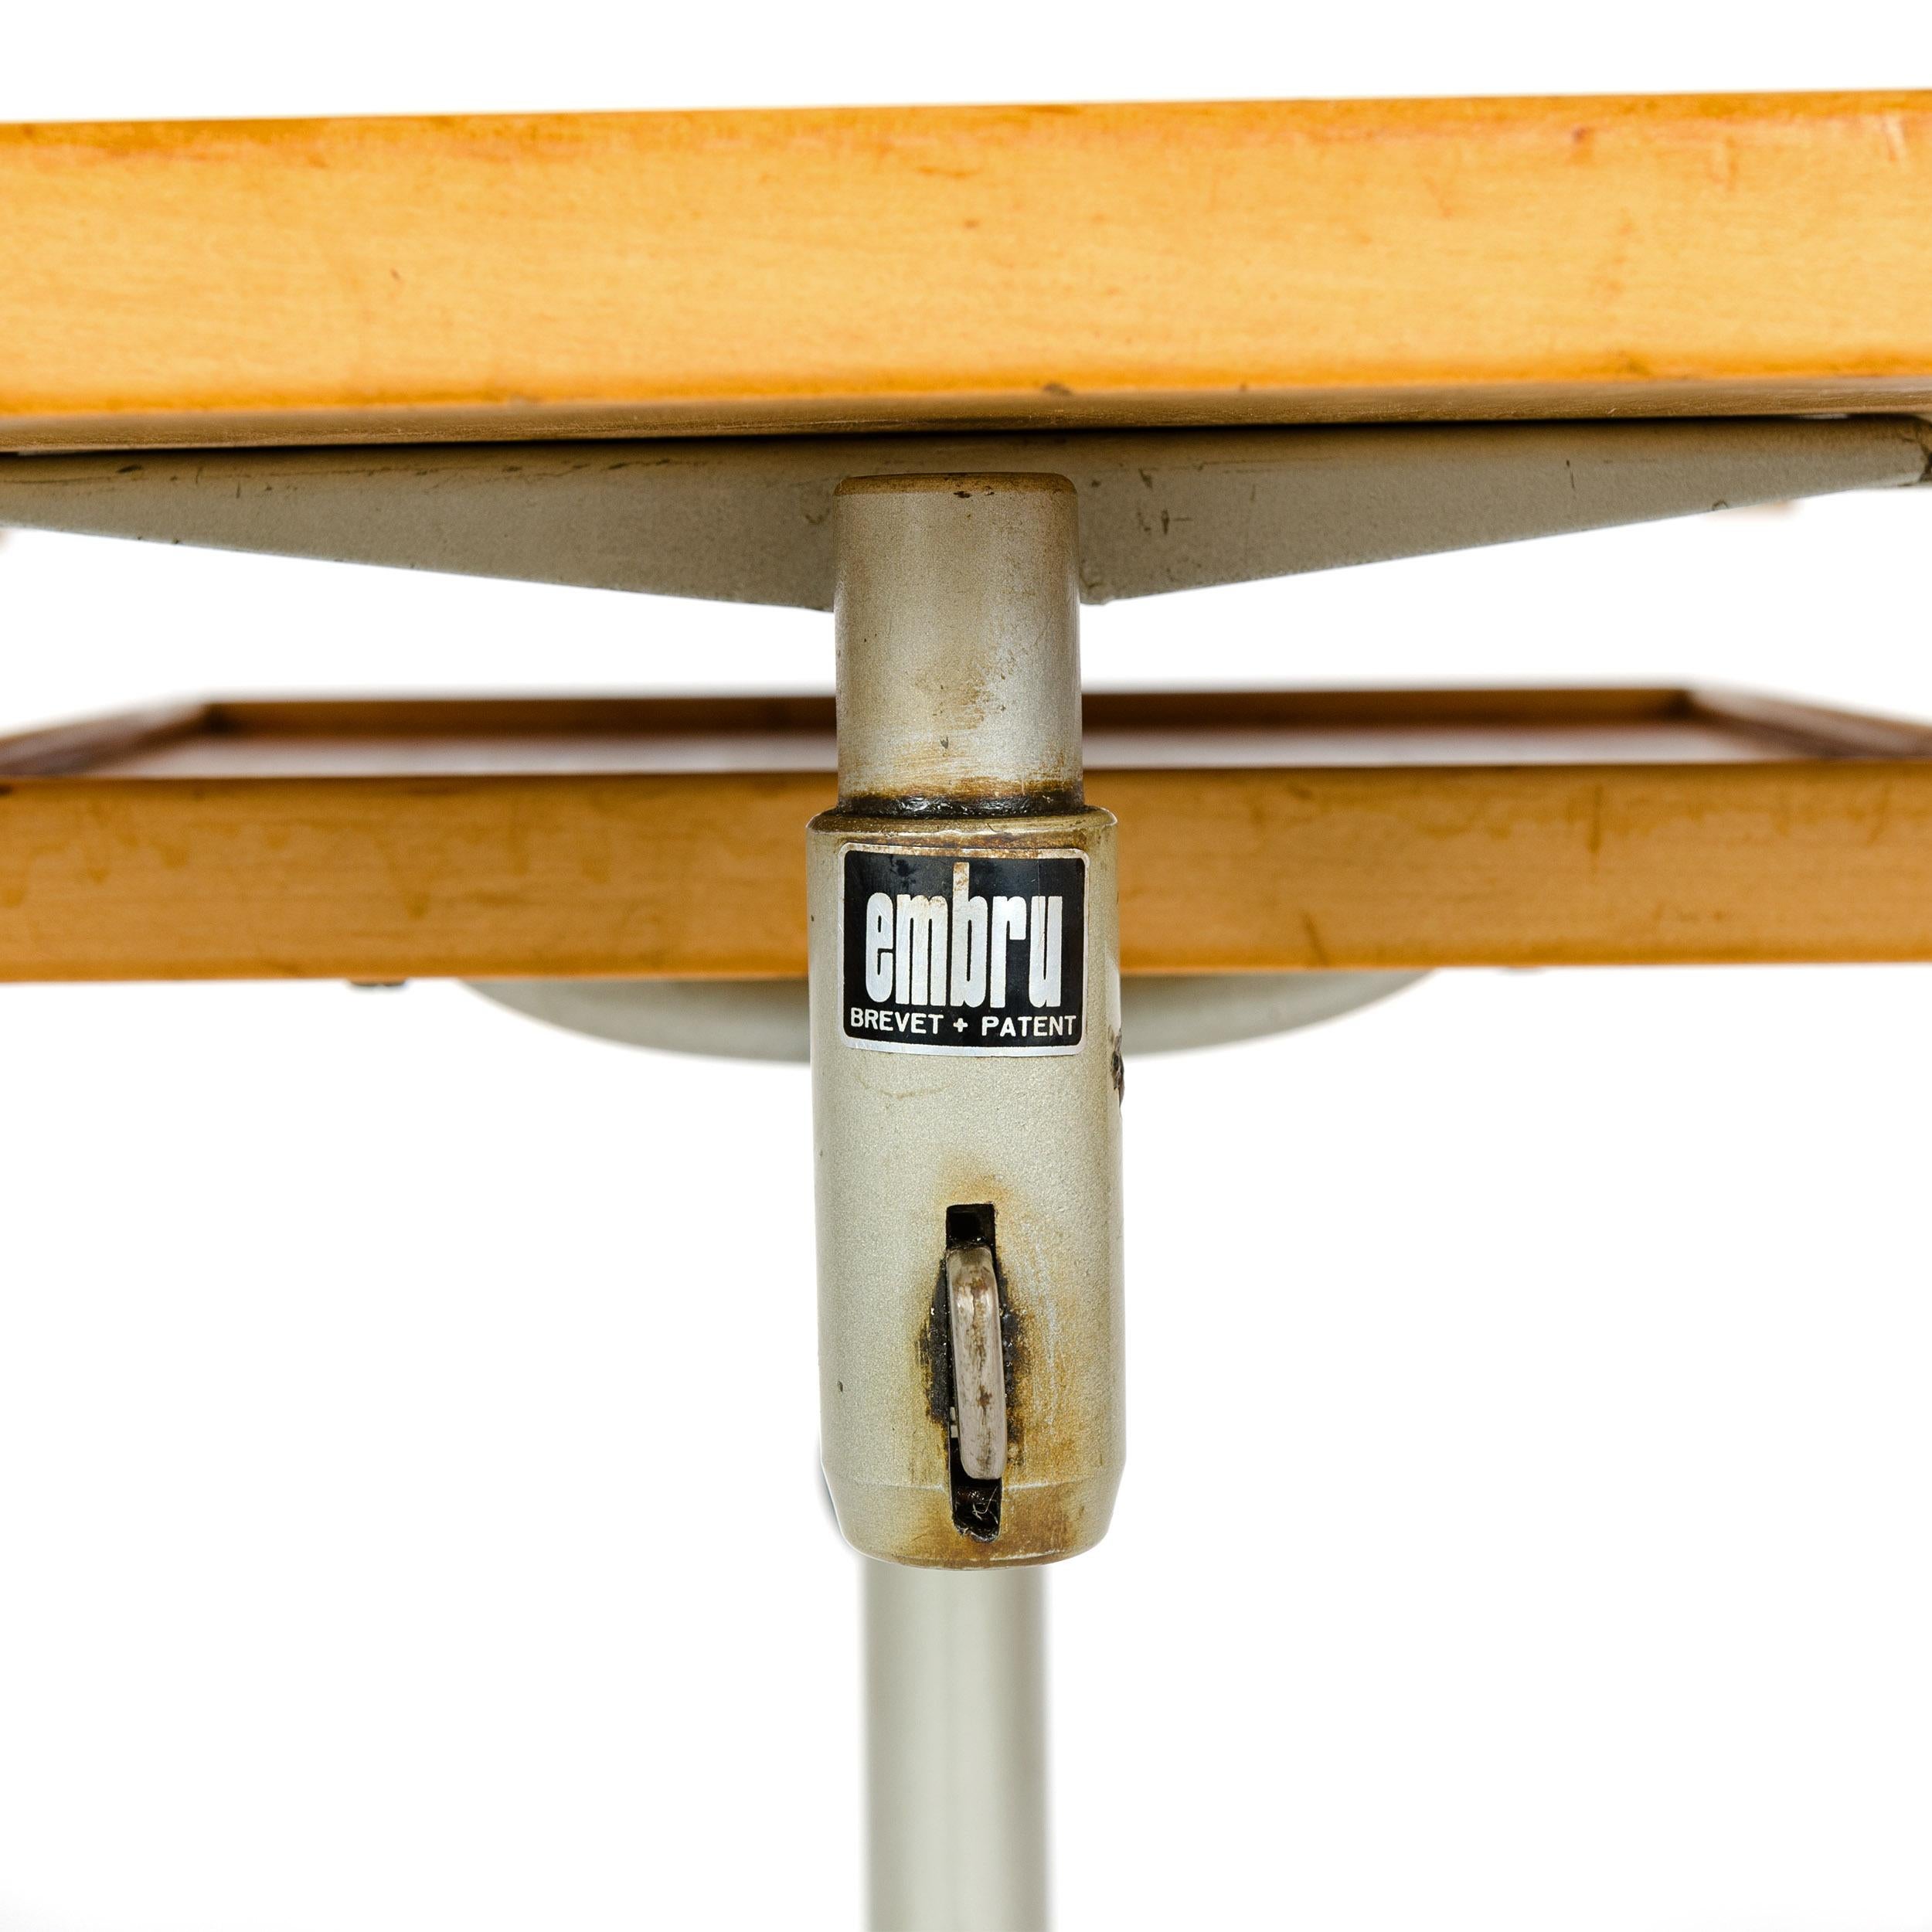 Bauhaus 1940s Swiss Utility Tray Table by Georg Albert Ulysse Caruelle for Embru For Sale